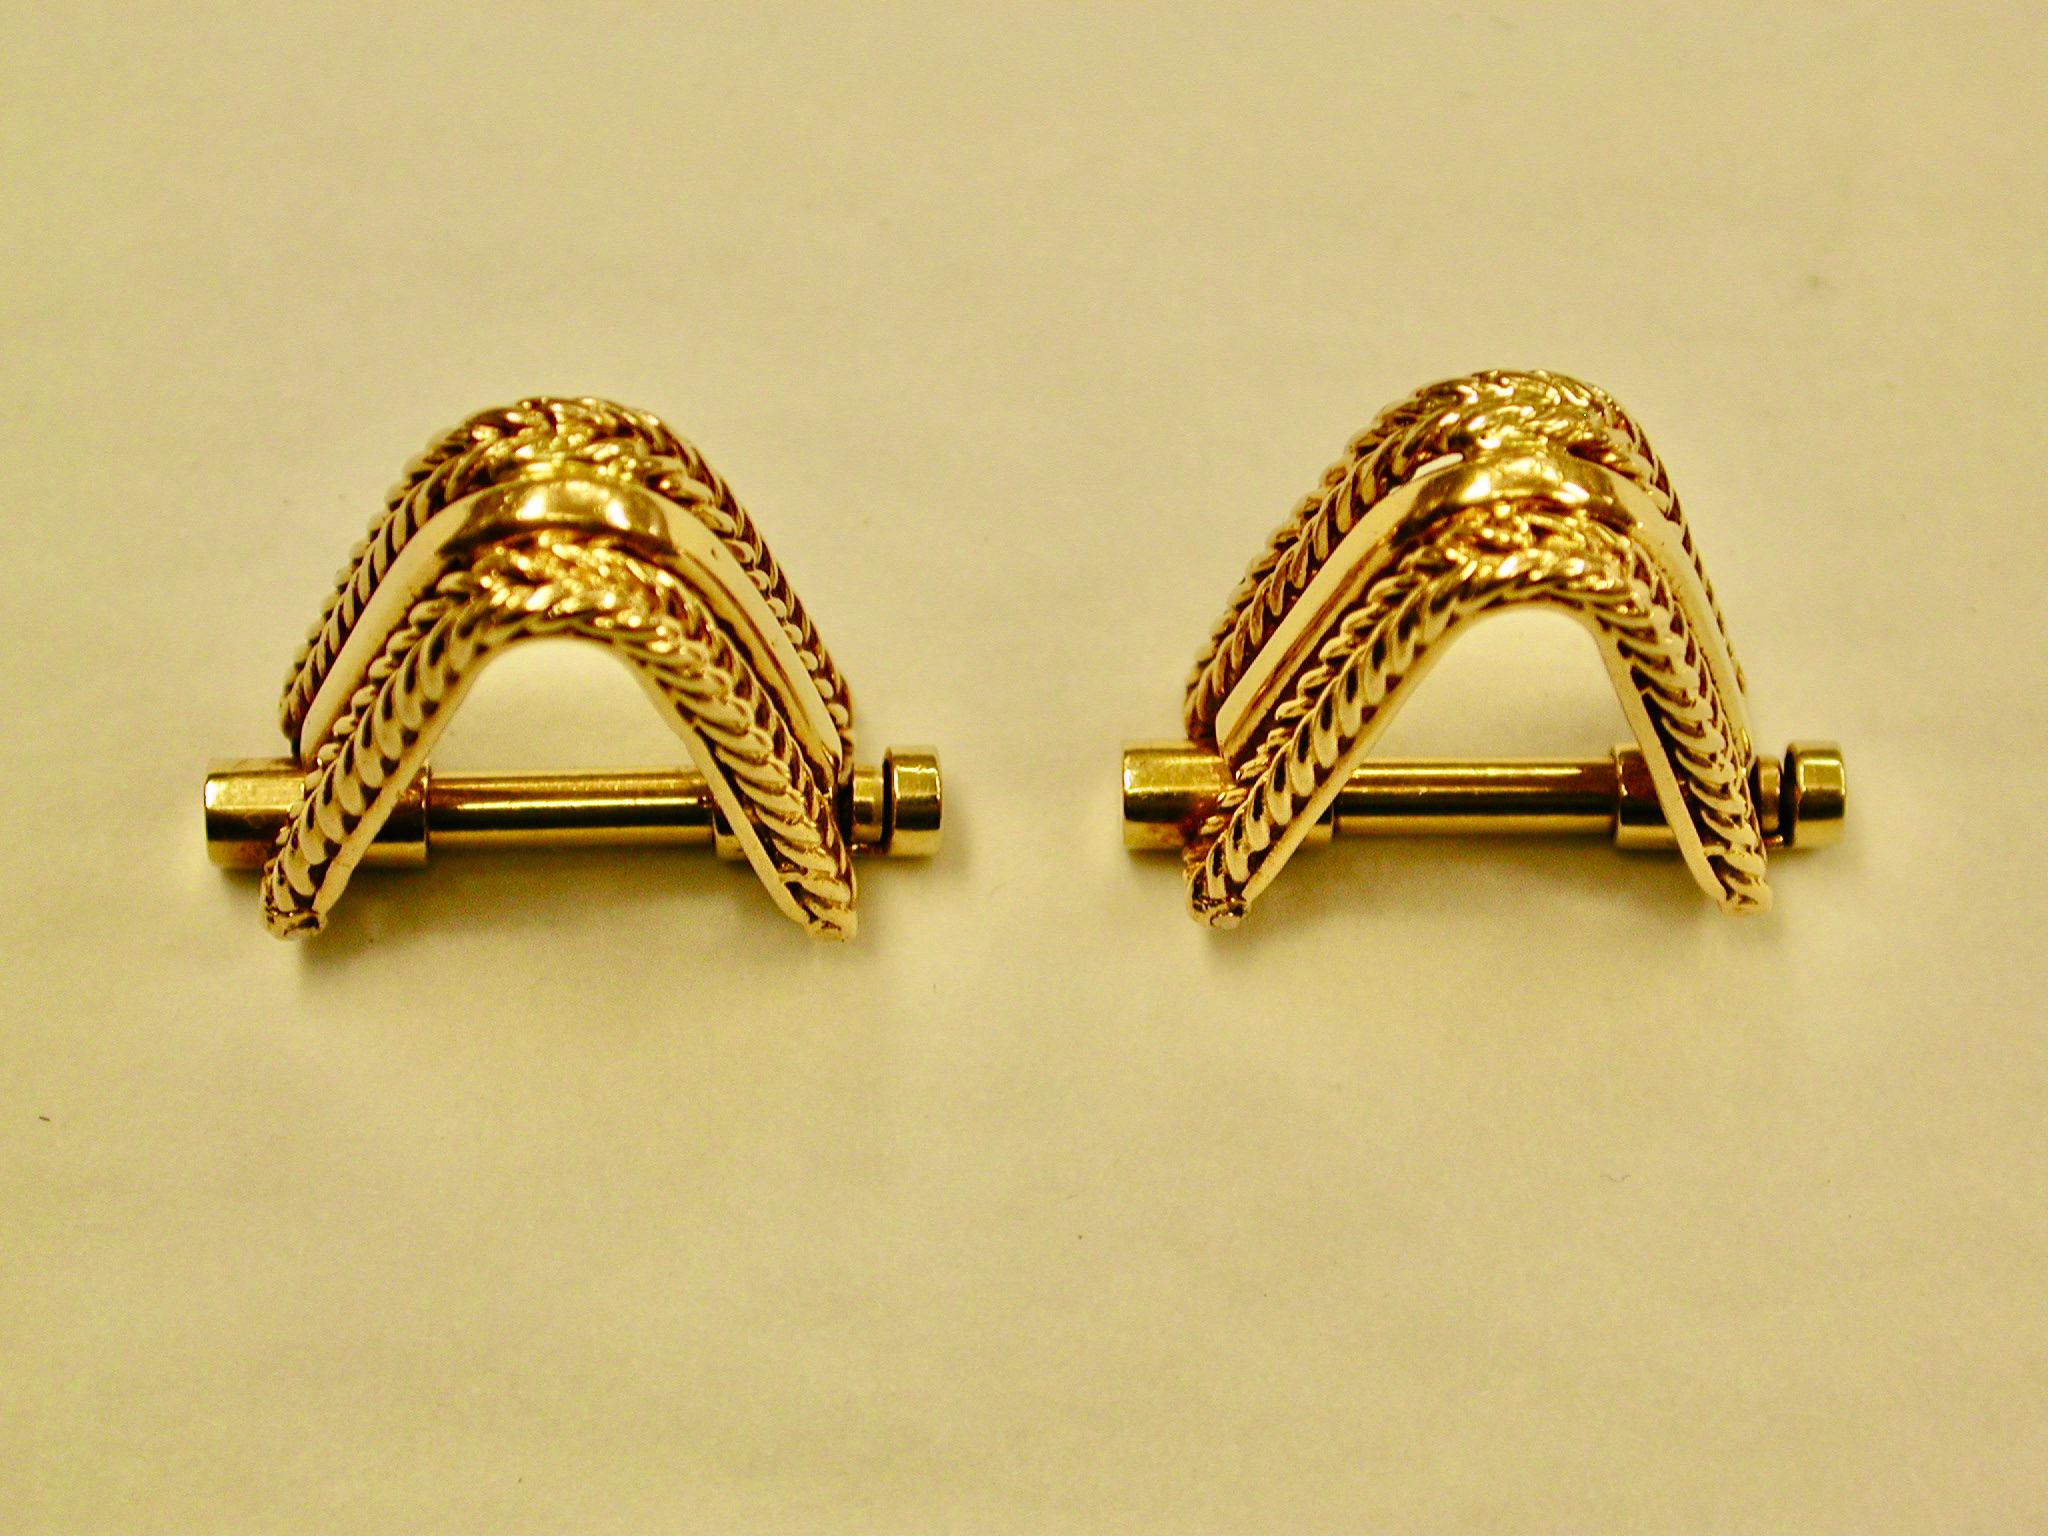 Pair Of Men's 18ct Gold Cufflinks,Braided Foxlink With Sprung Bar Fitting,1957
Heavy quality pair of men's cufflinks made by Sanit & Stein of London.
The sprung bar on each cufflink makes life quick and easy when fitting through the cuff.